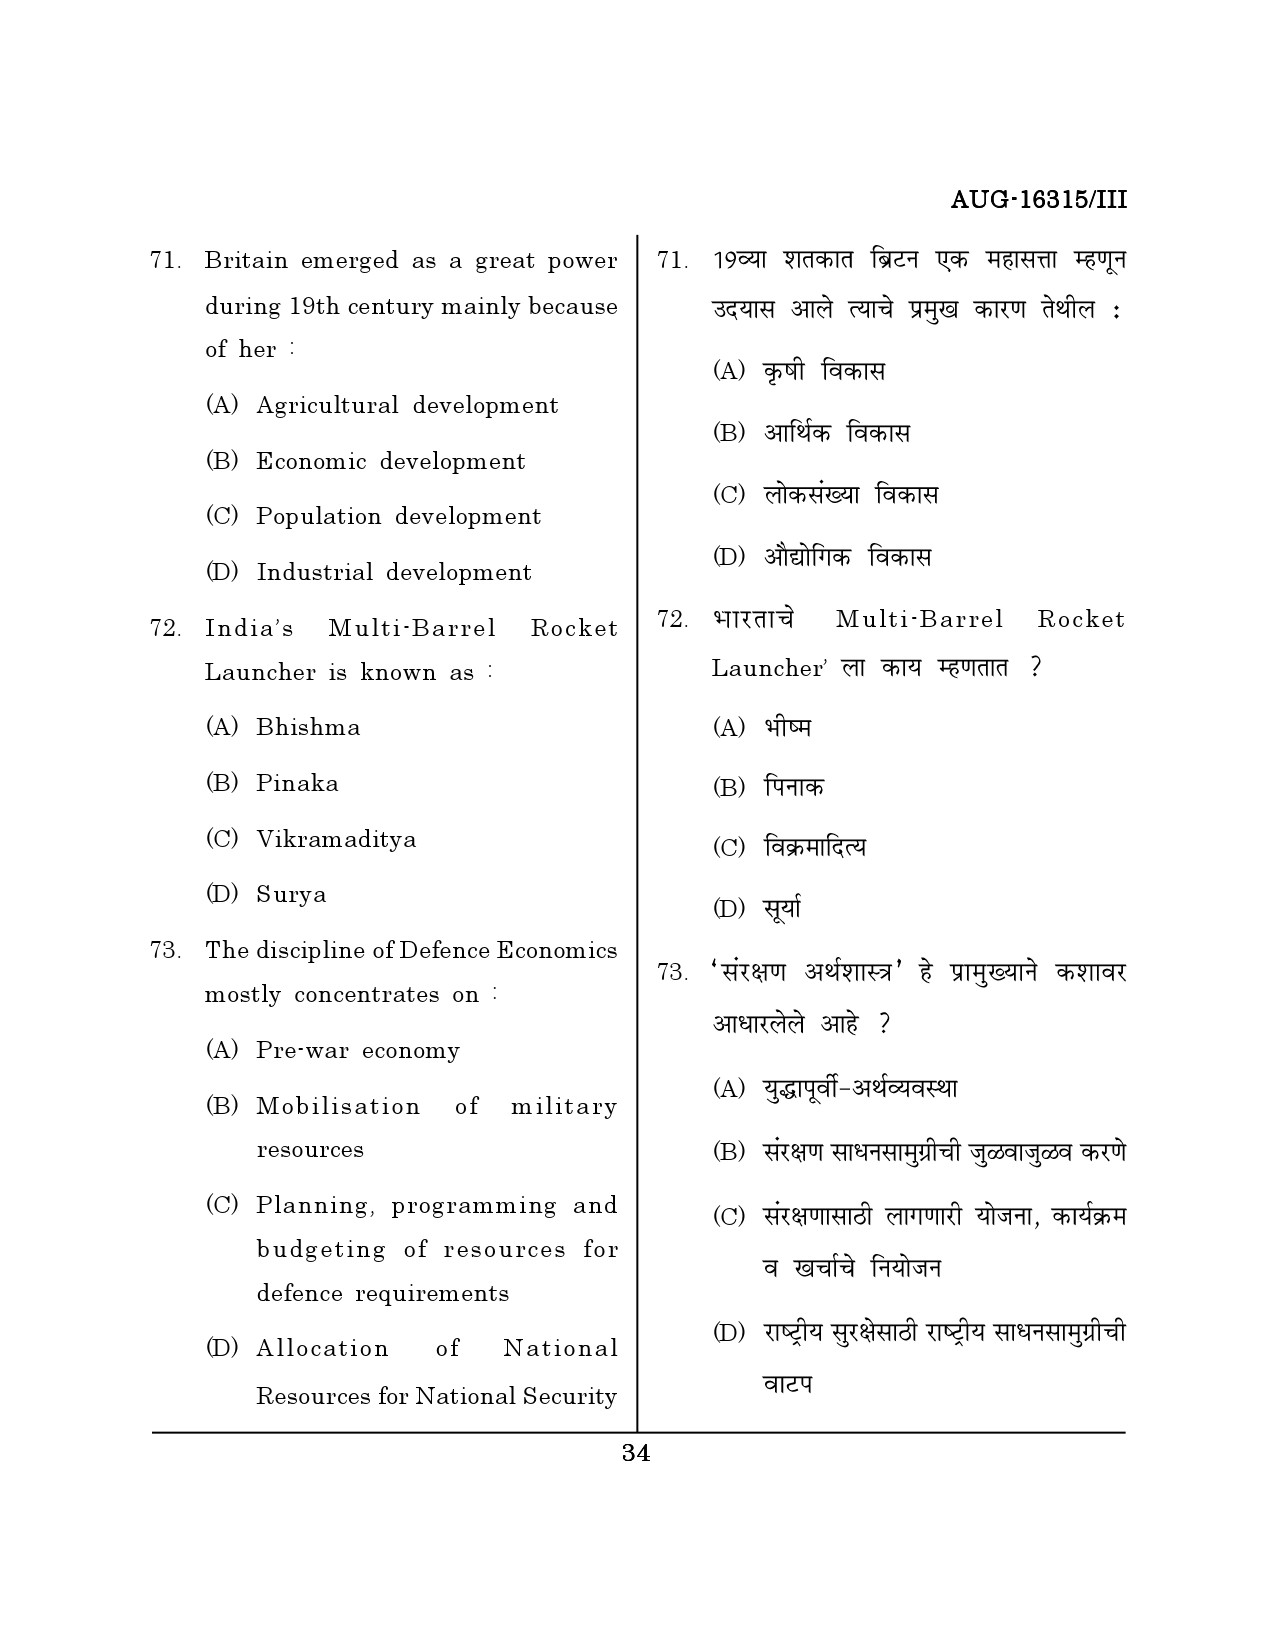 Maharashtra SET Defence and Strategic Studies Question Paper III August 2015 33